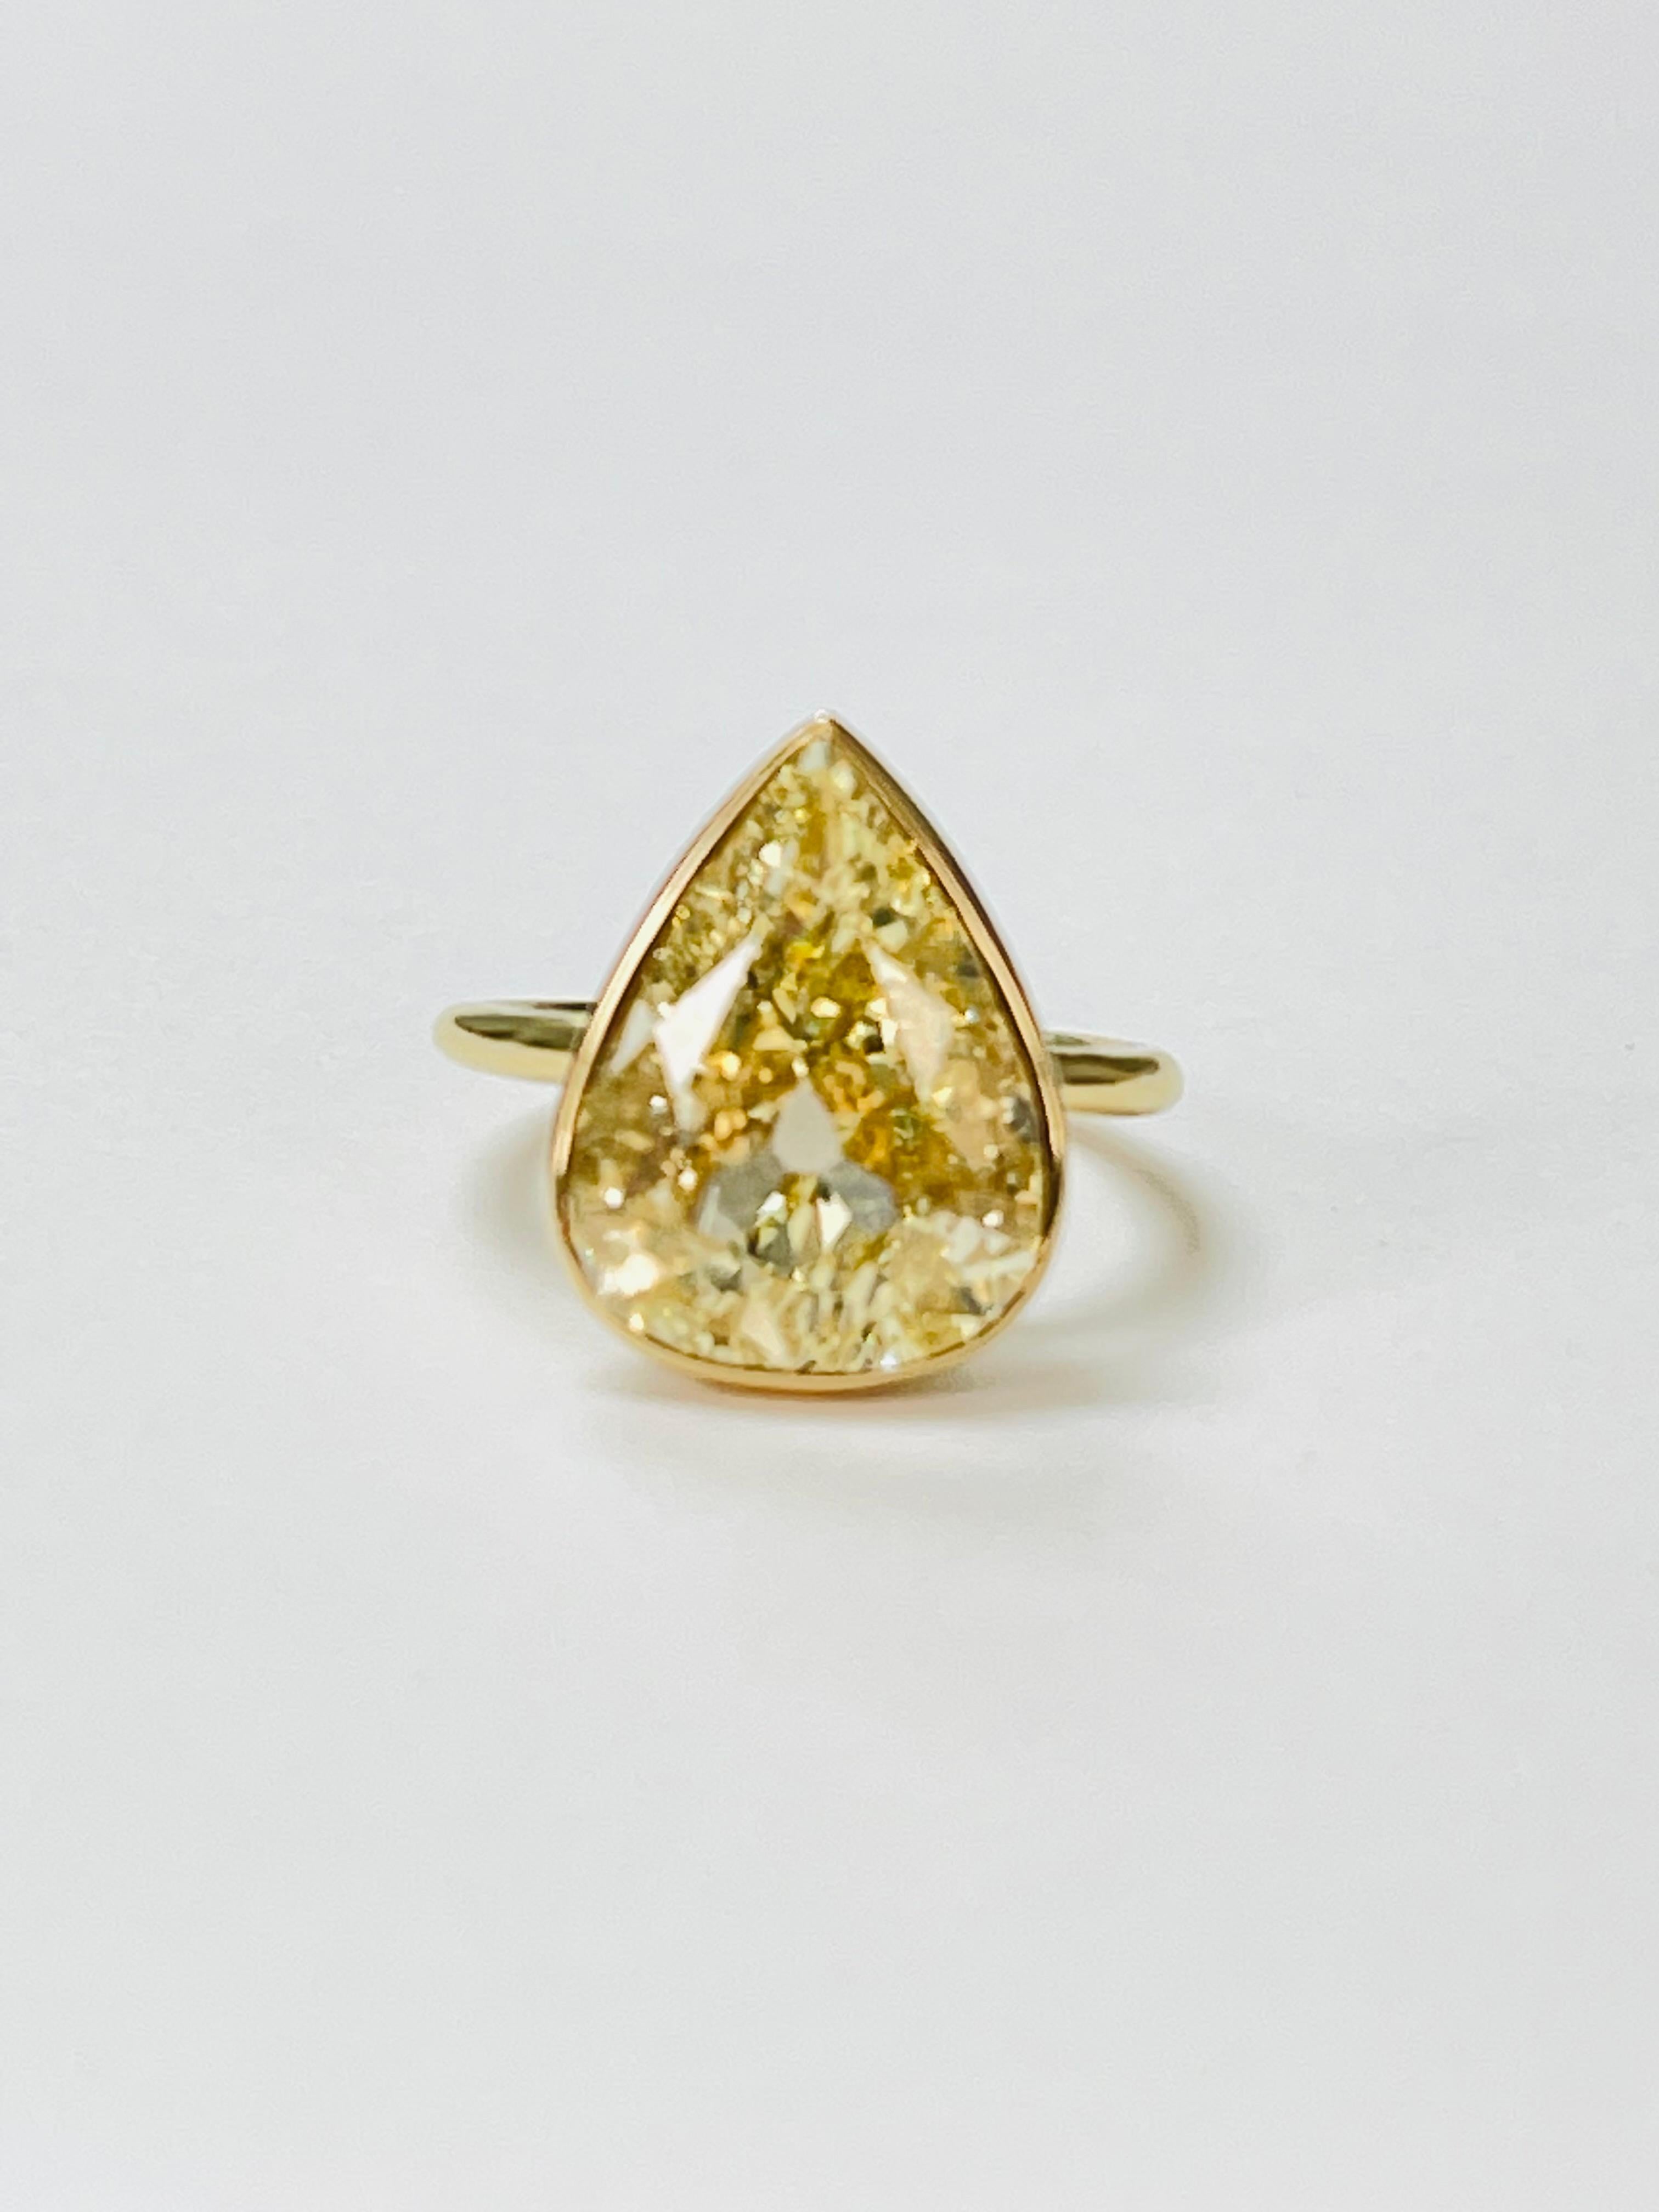 Contemporary GIA Certified Fancy Yellow Pear Shape Diamond Ring in 18k Yellow Gold For Sale